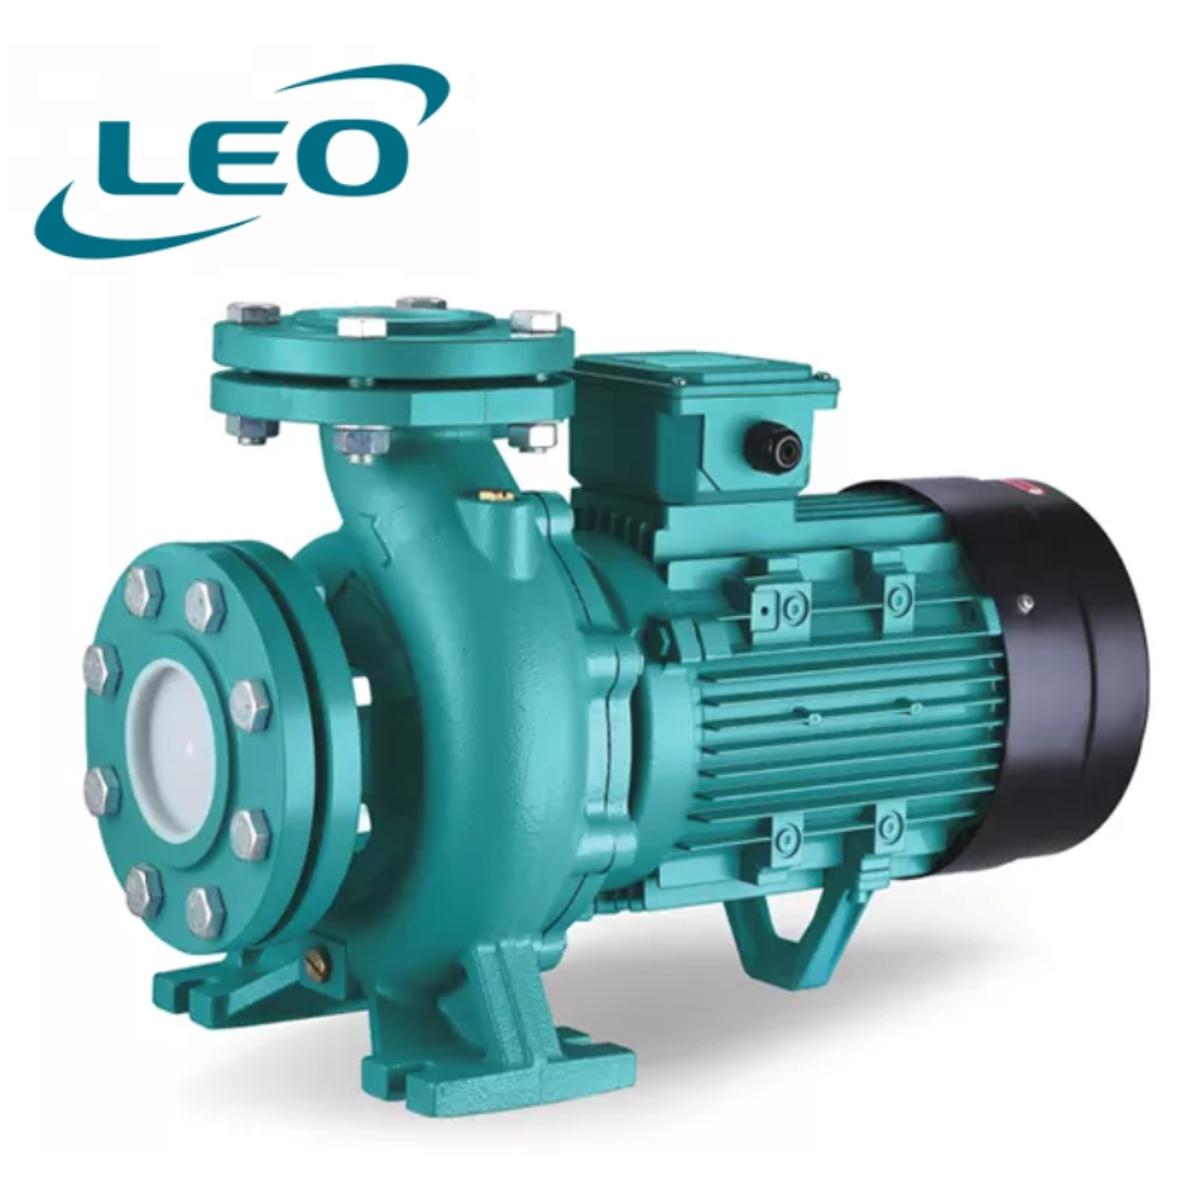 LEO - XST-65-125-55 - 5500 W - 7.5 HP - Clean Water HEAVY DUTY Centrifugal Pump With FLANGES  - 380V~400V THREE PHASE - SIZE :- 3" x 2 1-2 " - European STANDARD